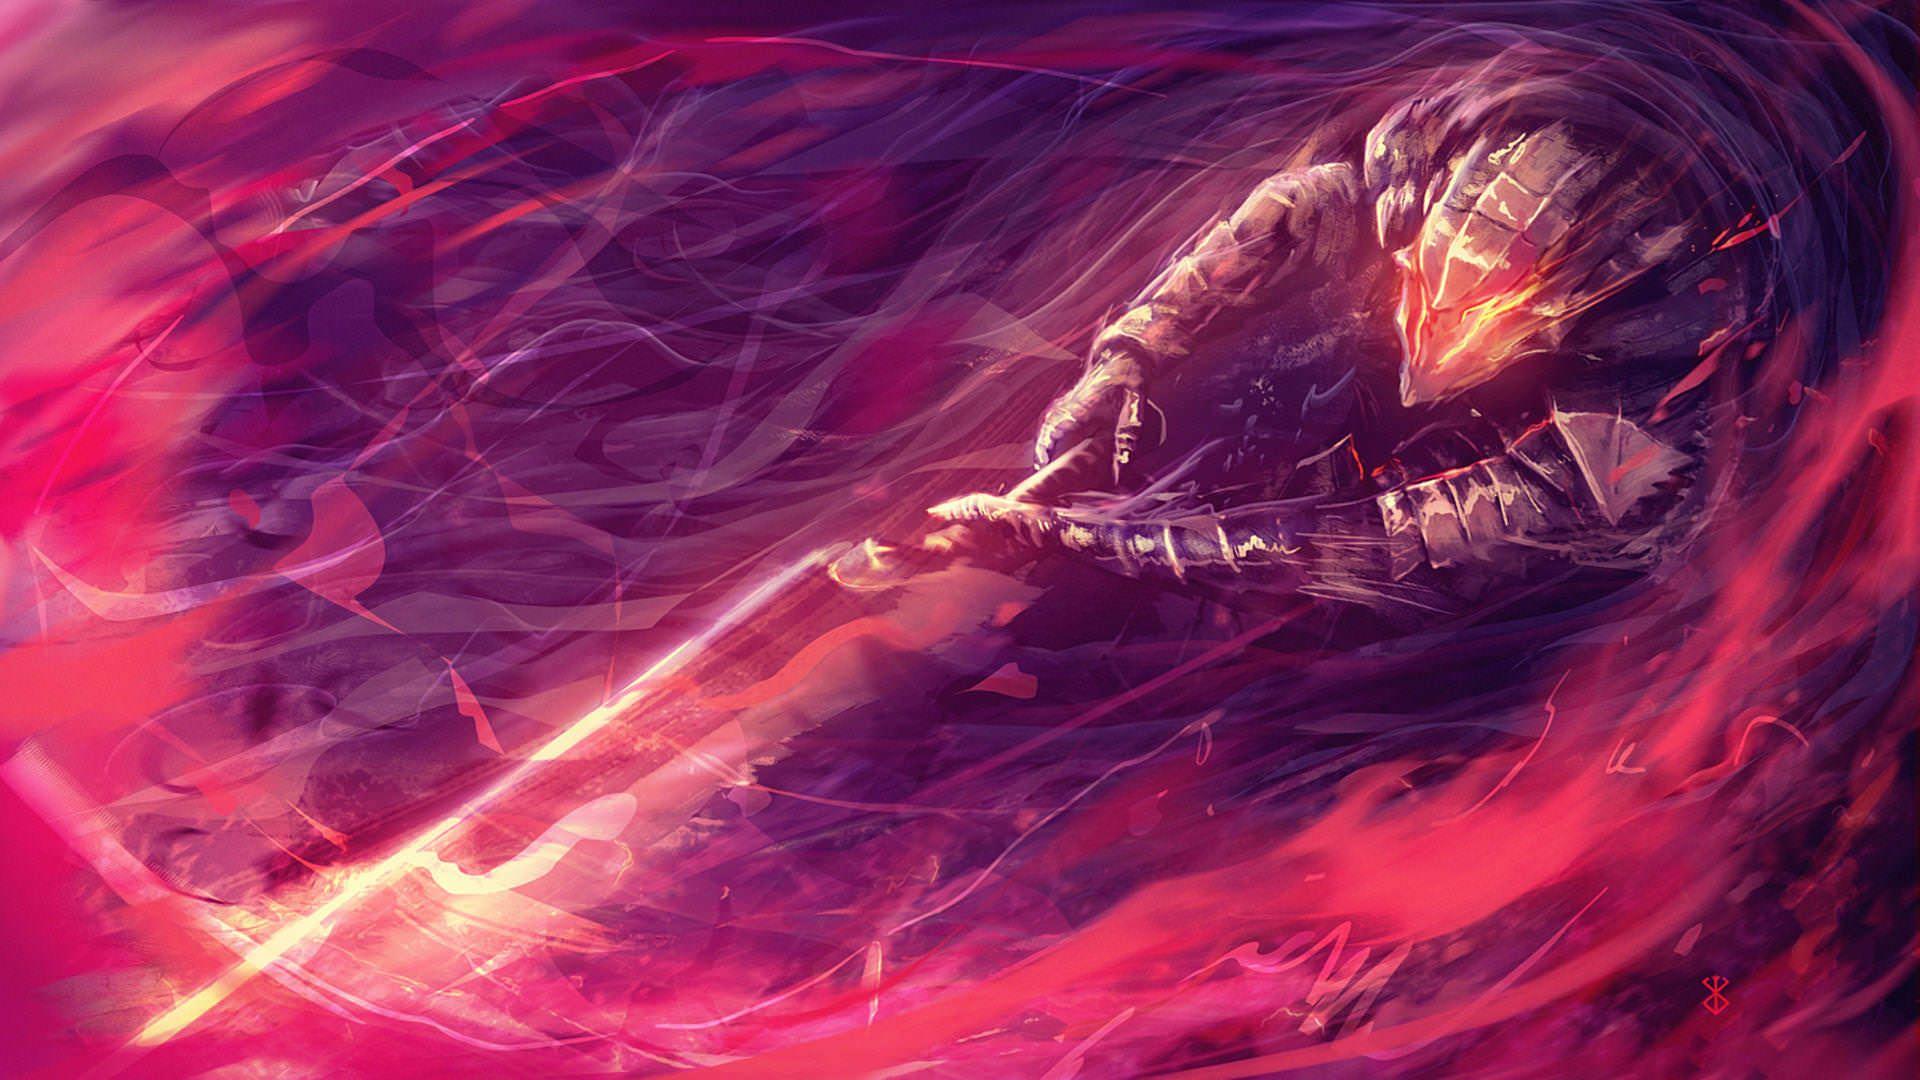 Pink Gaming Wallpapers Top Free Pink Gaming Backgrounds Wallpaperaccess We have a massive amount of hd images that will make your computer or smartphone. pink gaming wallpapers top free pink